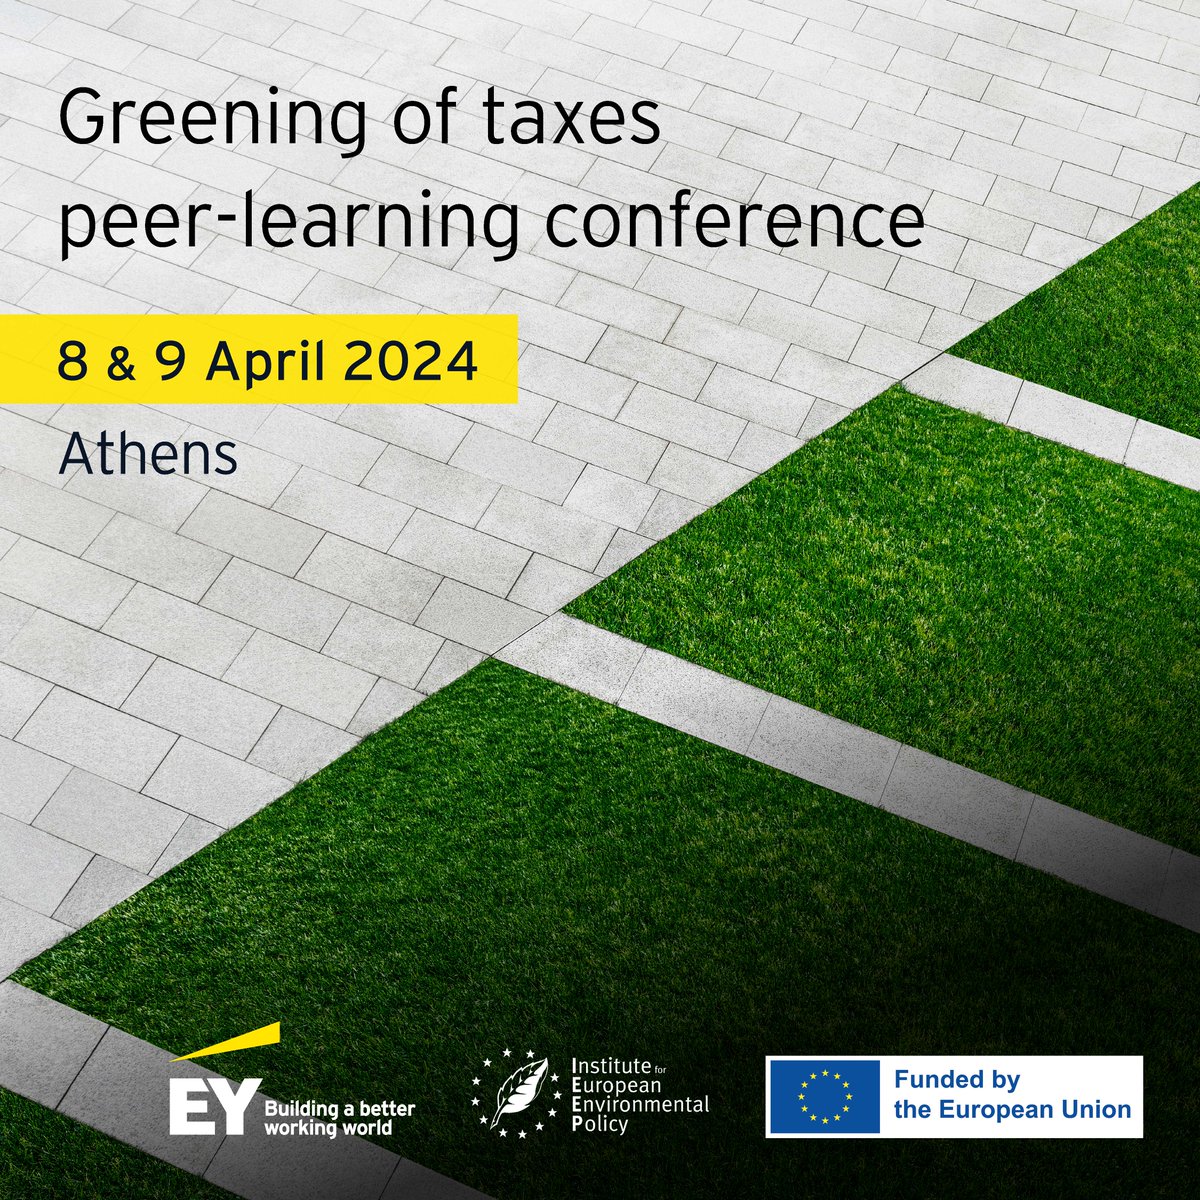 #EventNews: We are supporting the 🇬🇷 Ministry of Finance in adopting measures to align the tax system with the goals European Green Deal. Join us on April 8-9 at our conference to learn more about our #TSI project, funded by @EU_reforms @Nathaliedberger #EYGreece #GreeningOfTaxes